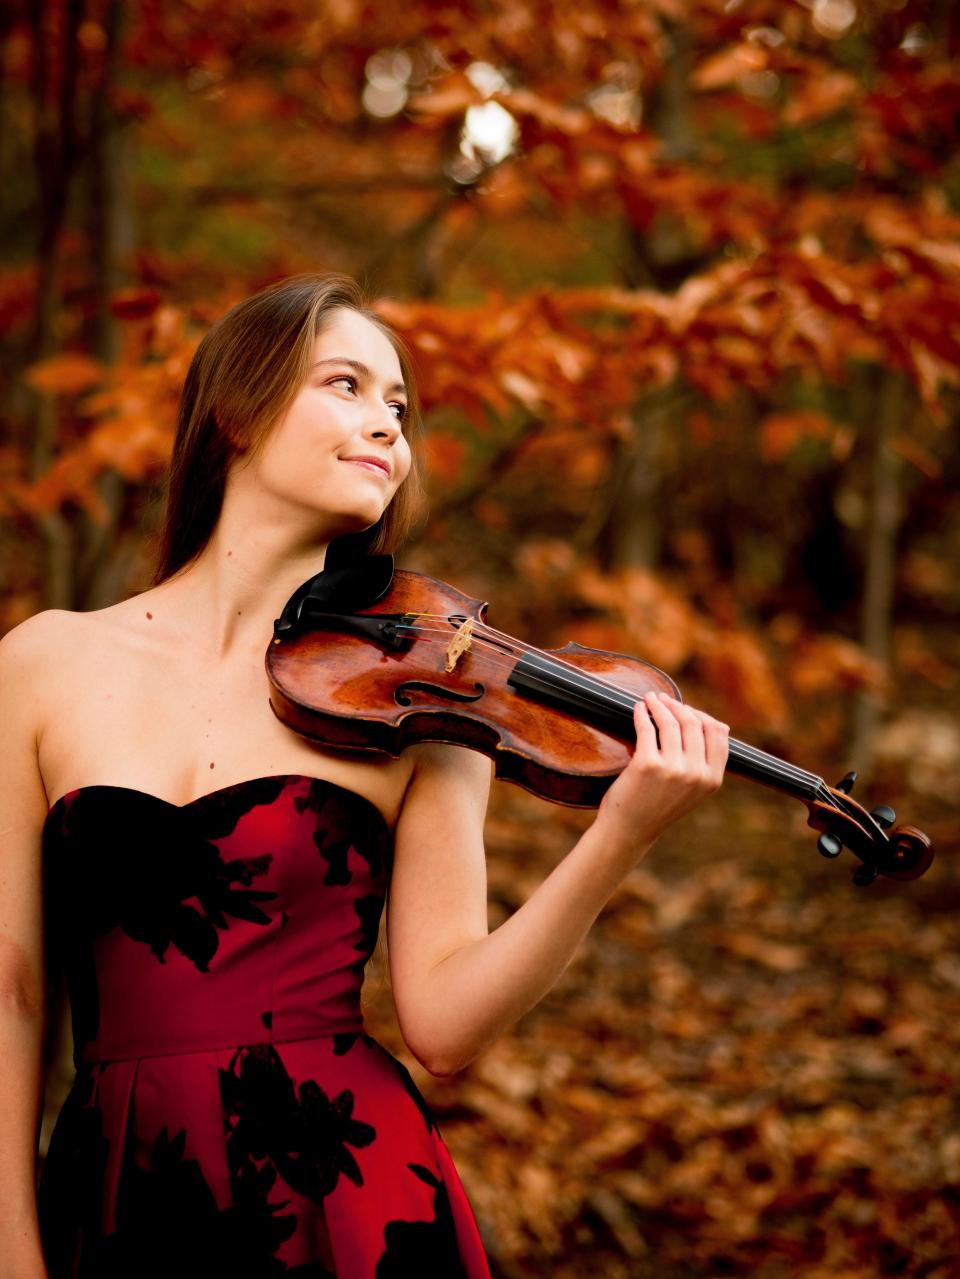 Violinist Geneva Lewis performs on the 1714 “Joachim-Ma” Stradivarius on a one-year loan from the New England Conservatory.